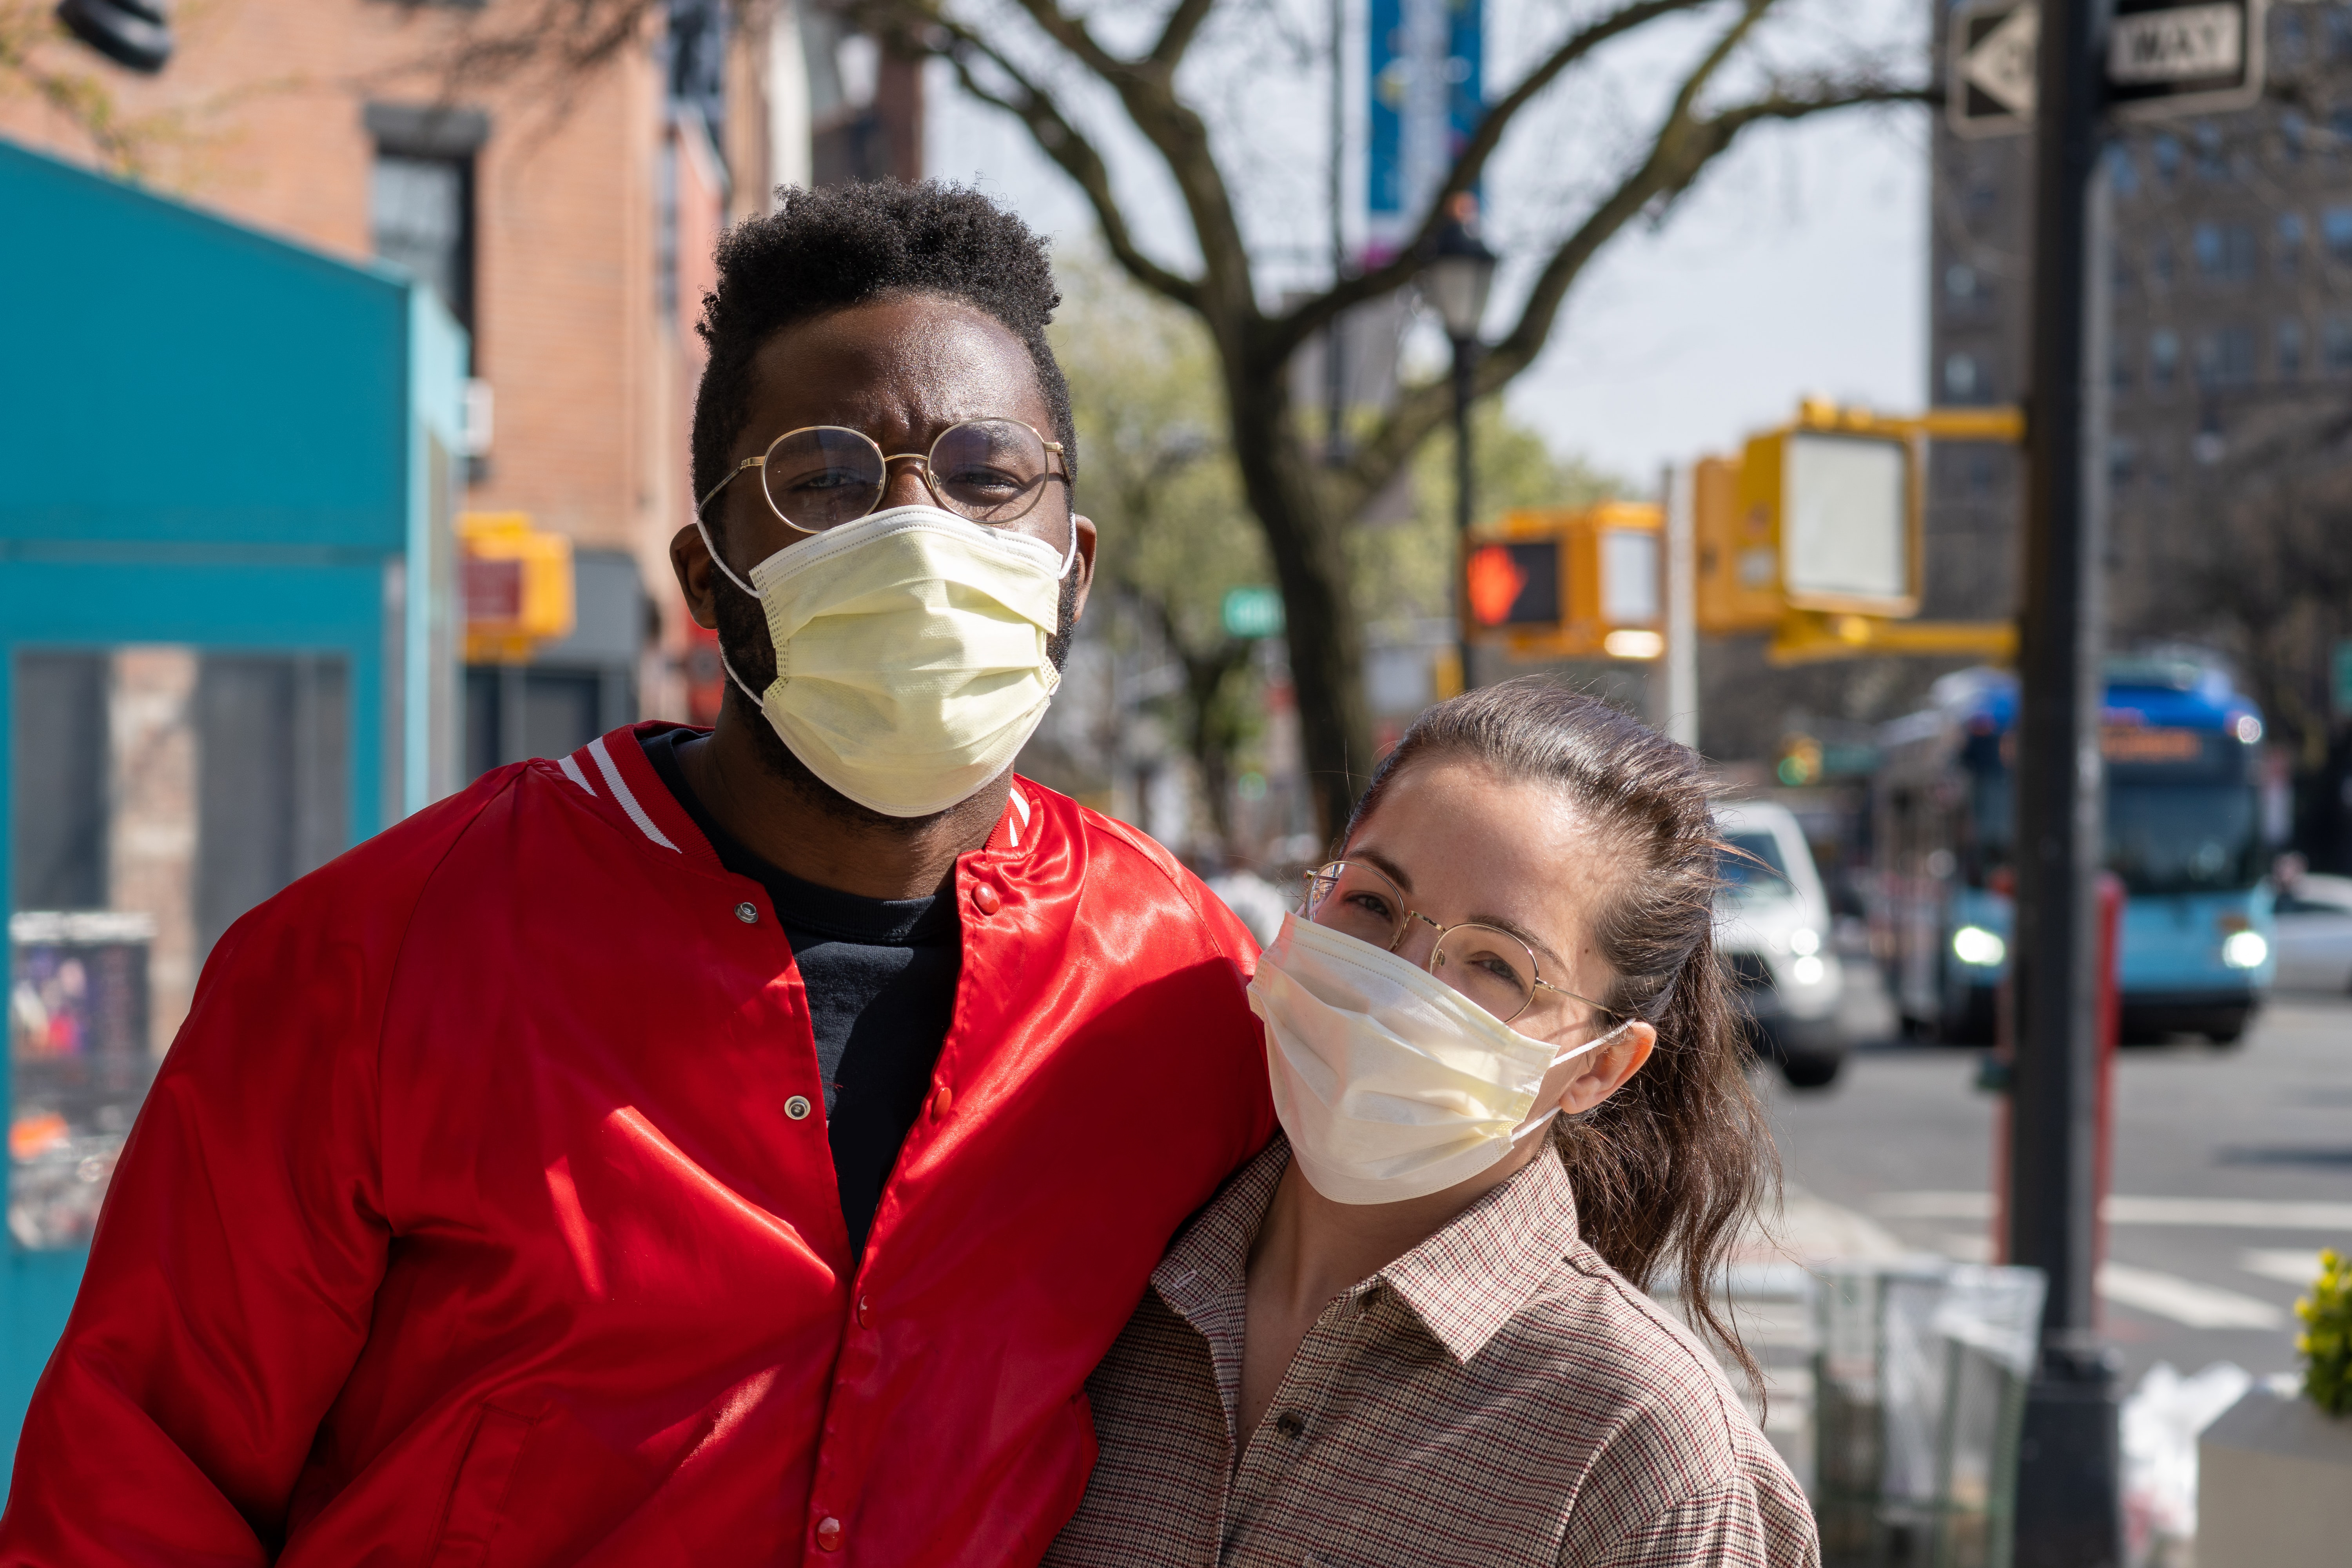 Two people wearing masks on a city street